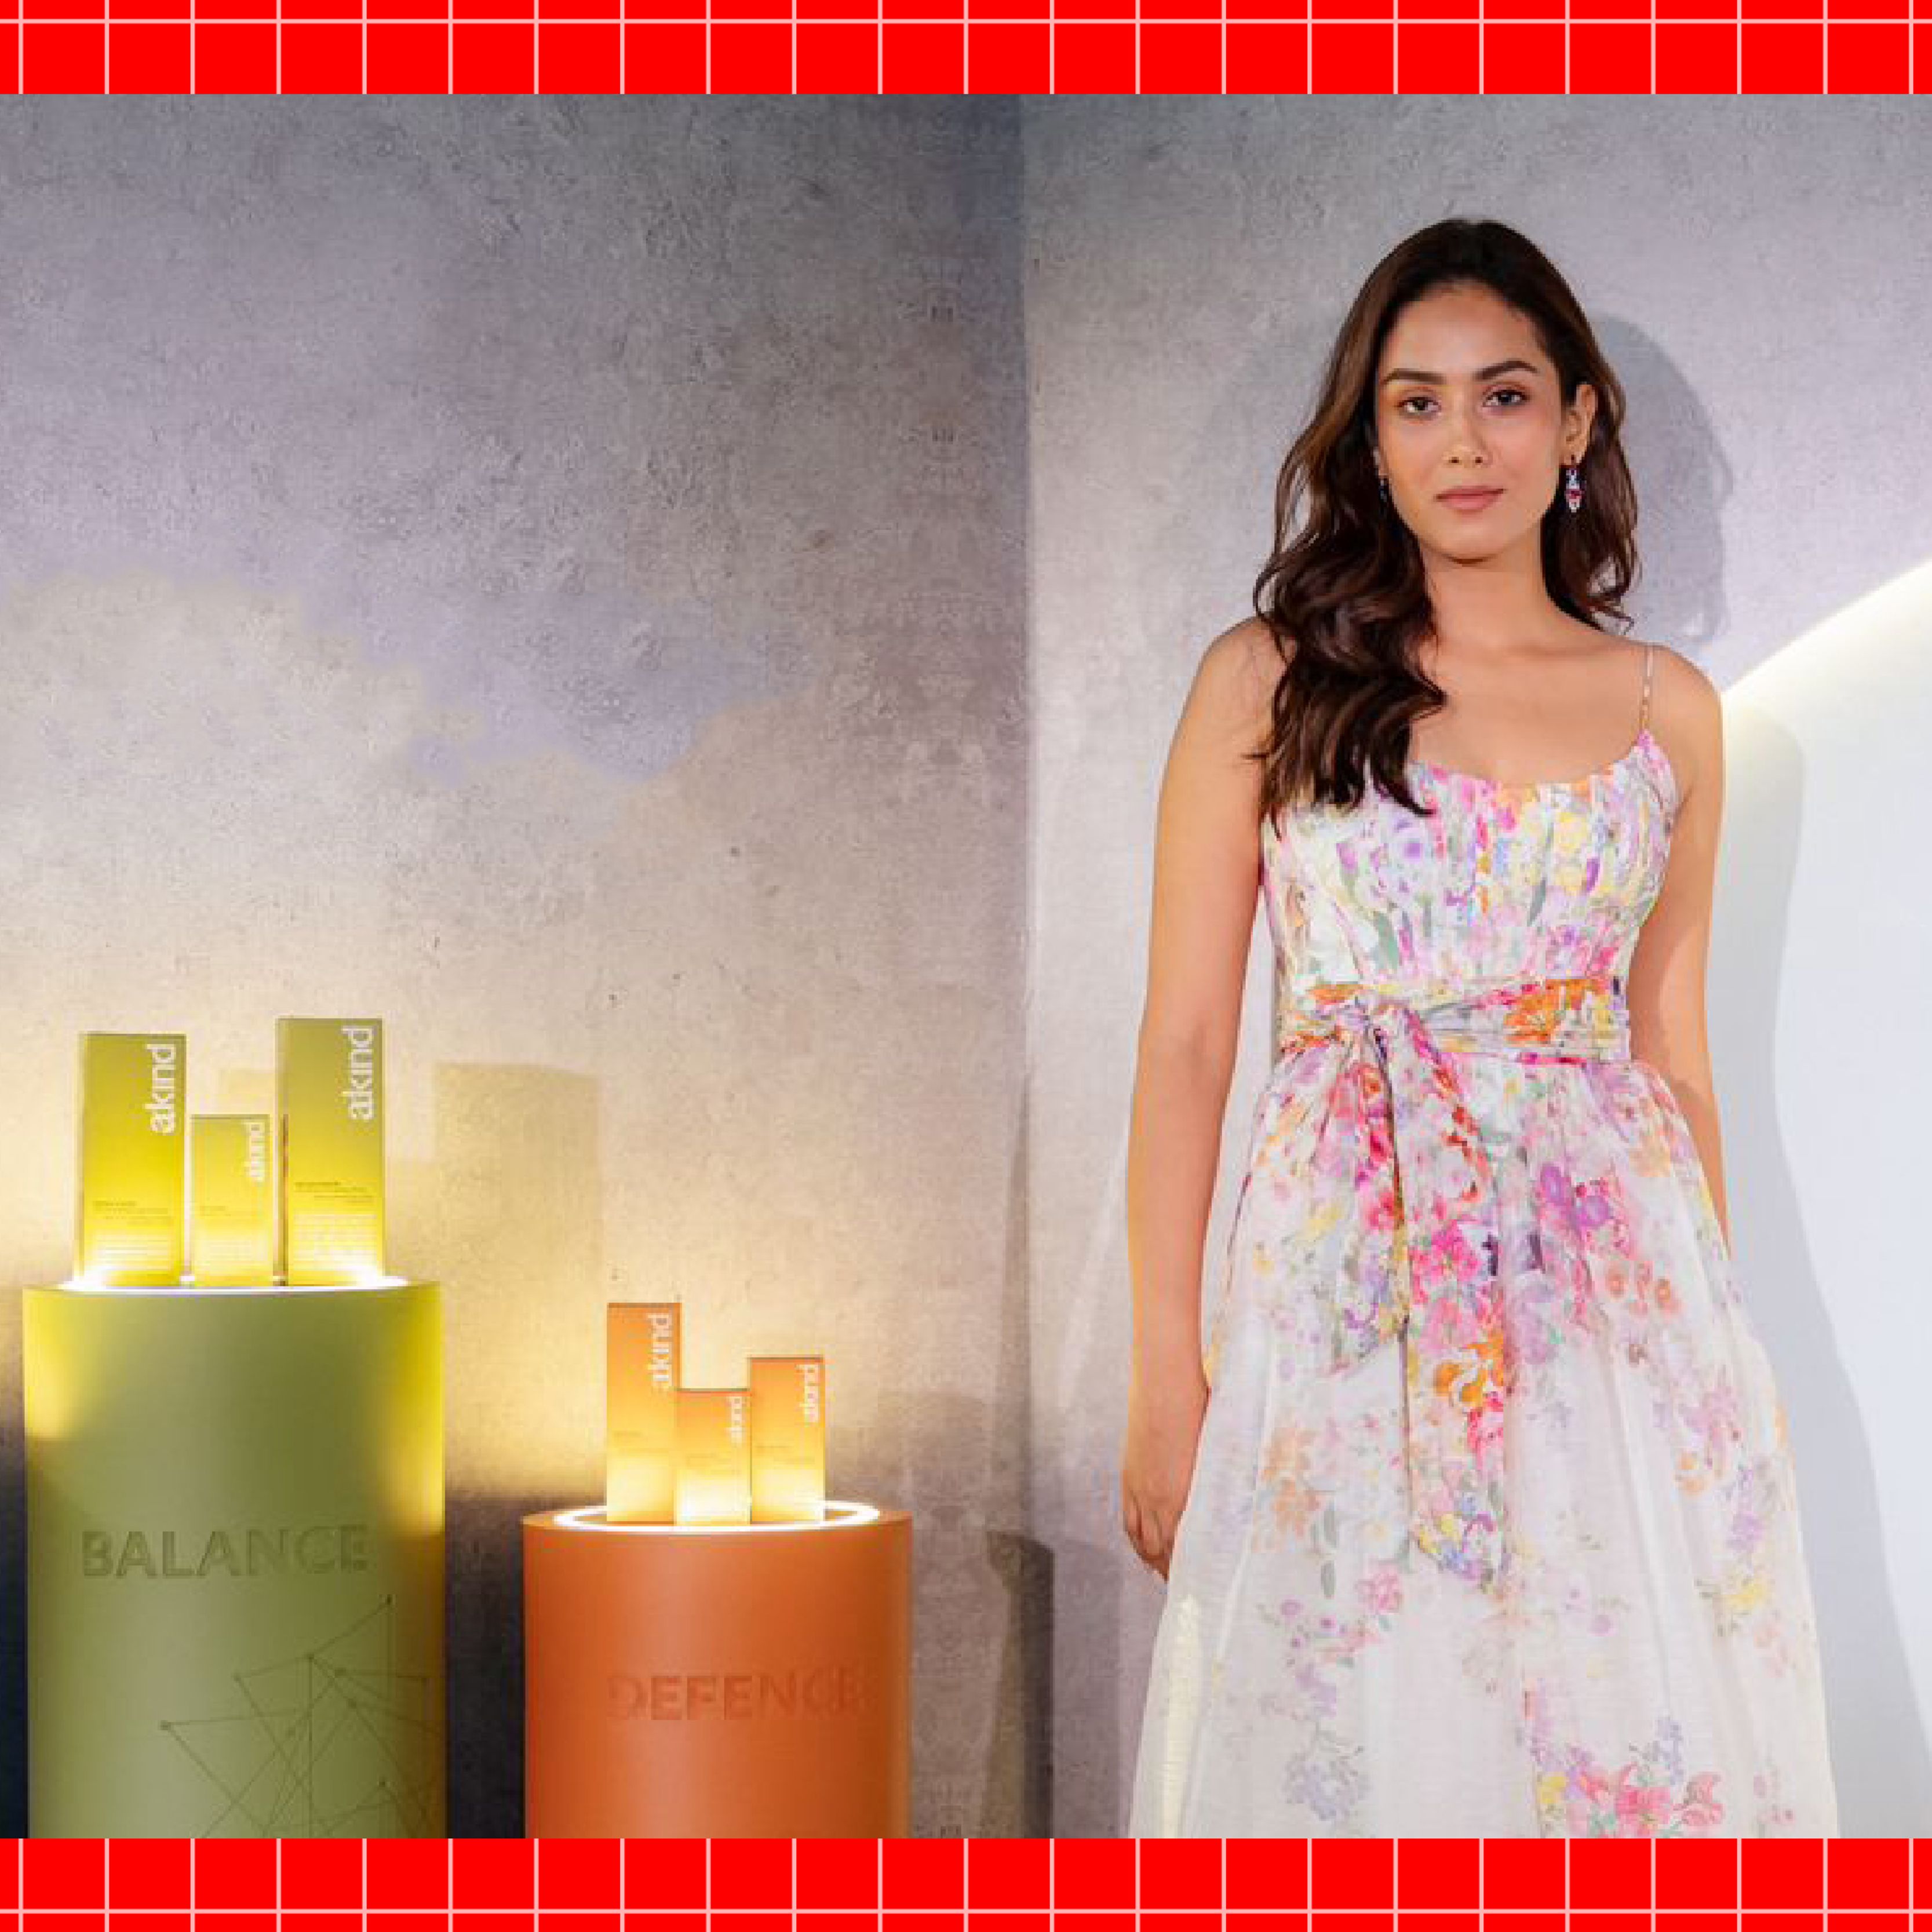 Skincare as self-care can be taught early, says Mira Kapoor on launching Akind